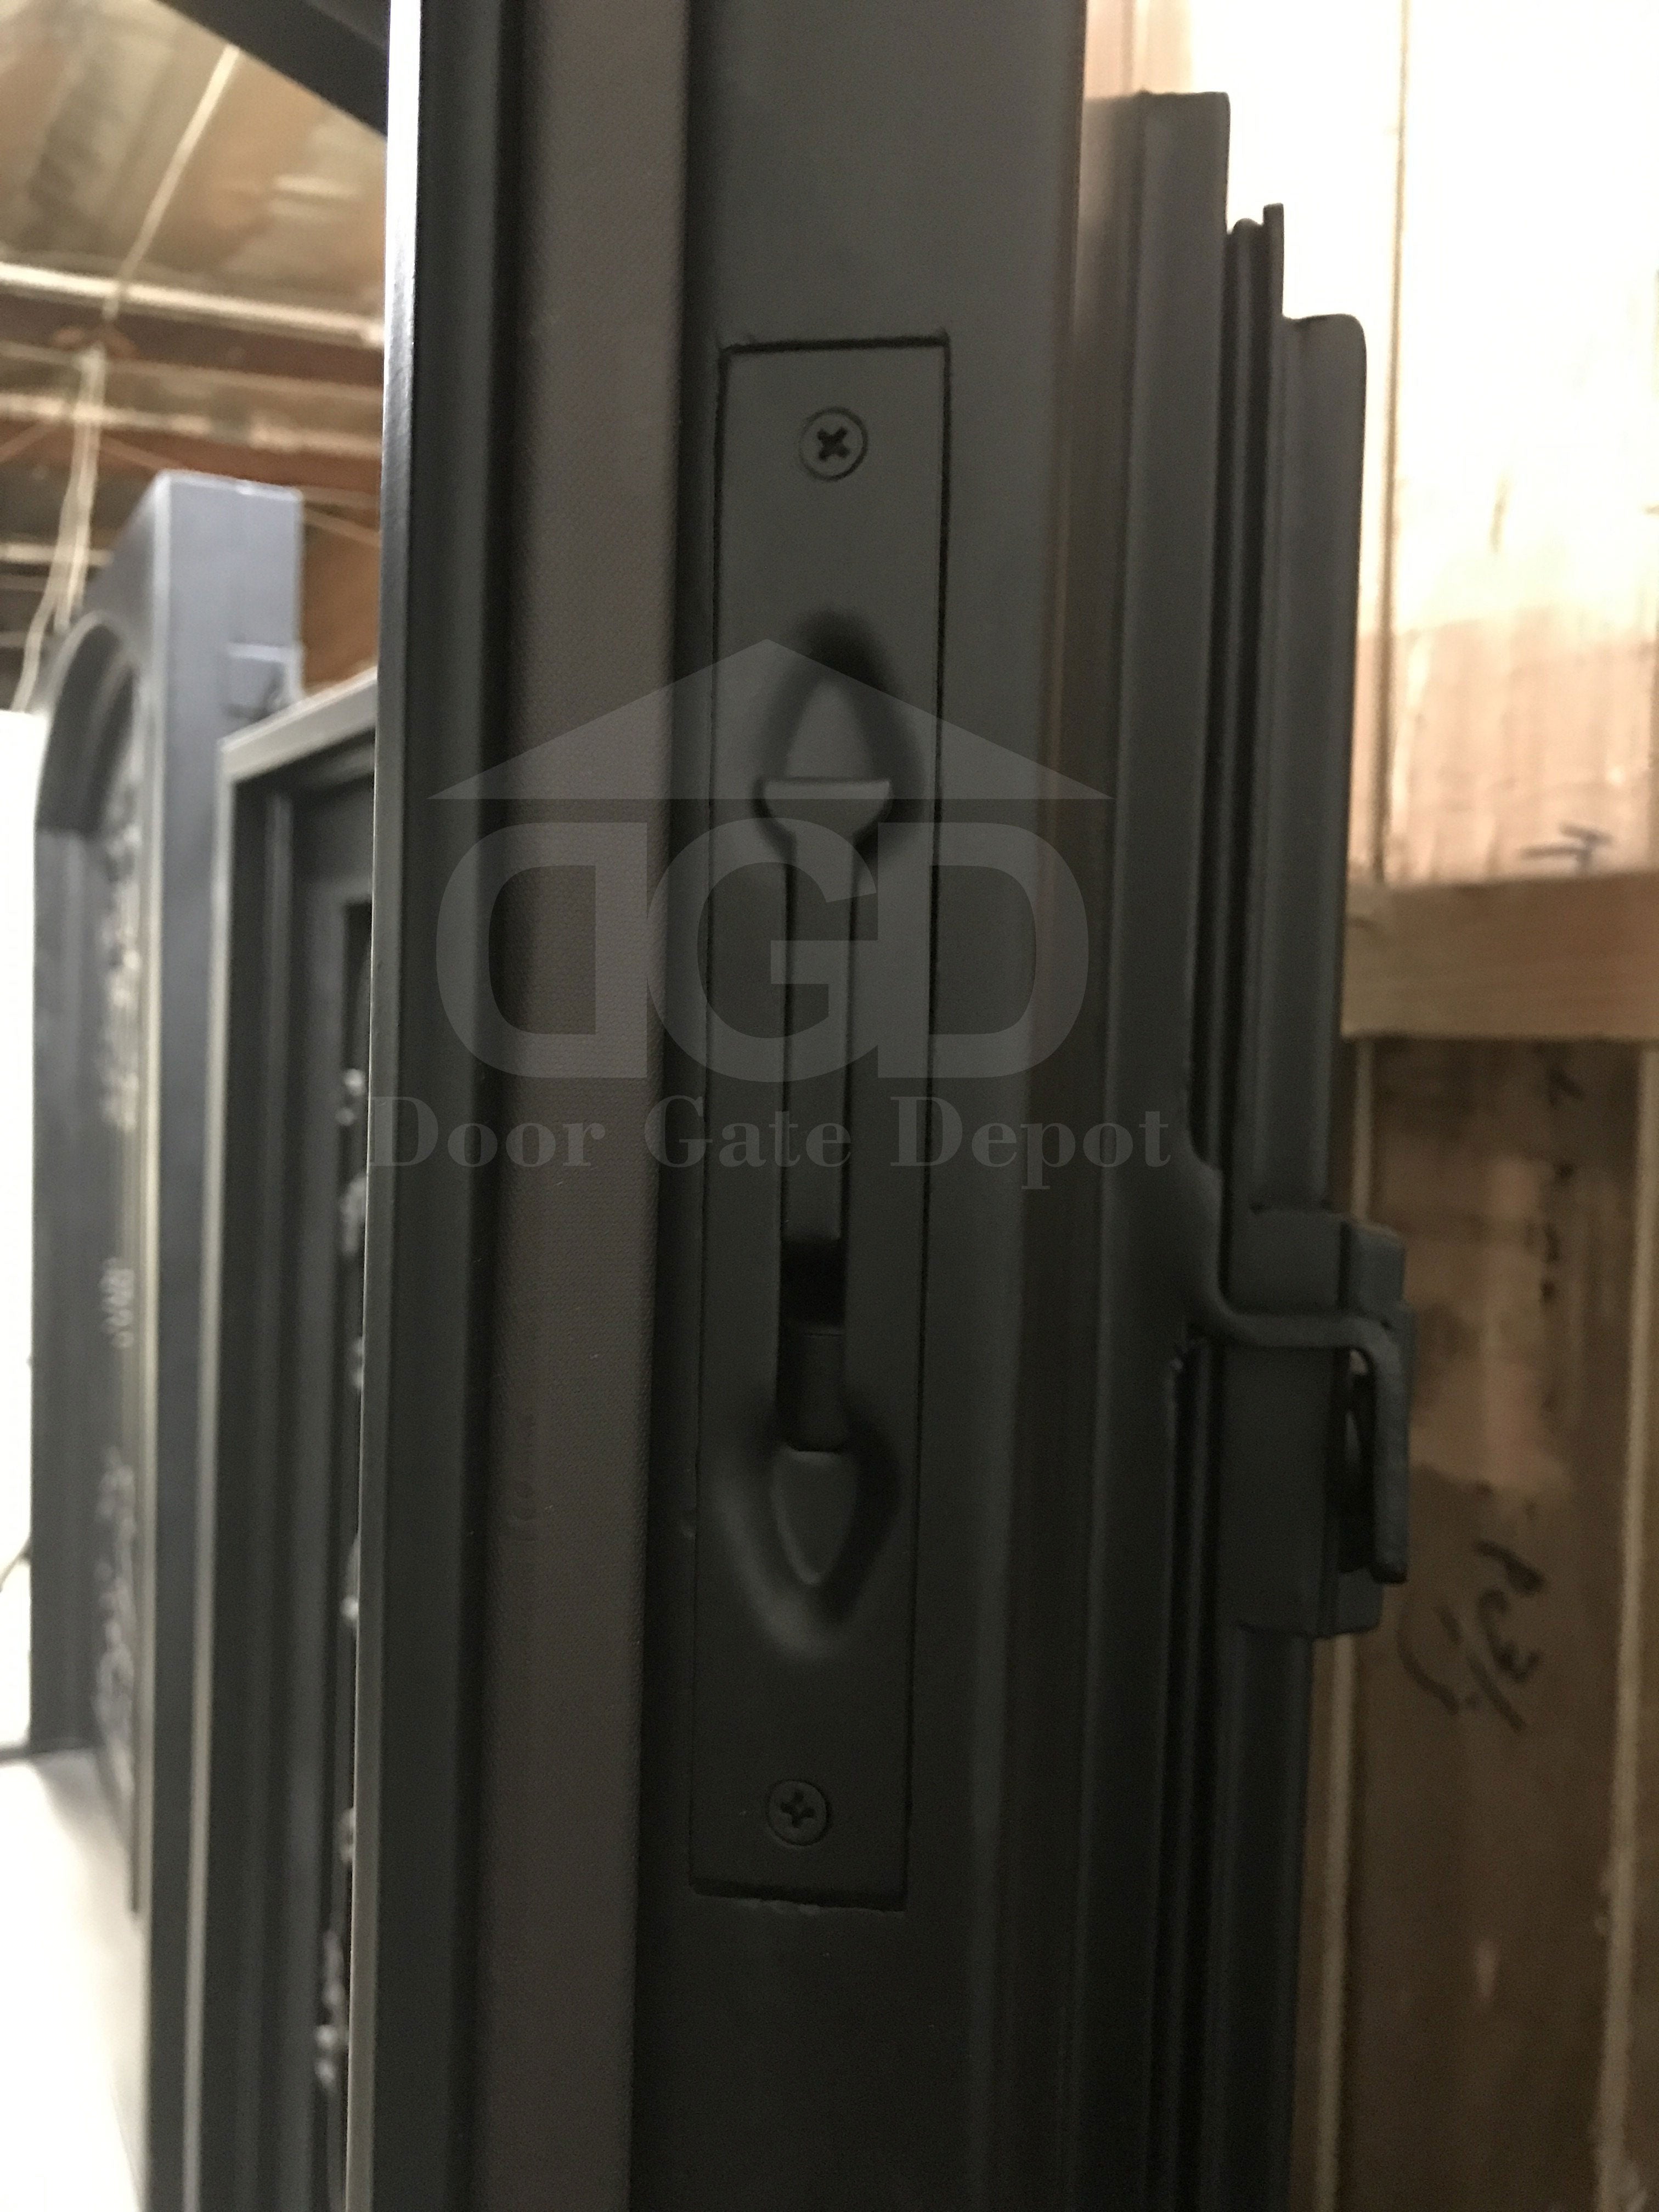 LOTUS- square top, modern french style, dual pane,bug screens, frosted tempered glass, wrought iron doors-72x96 Right Hand - Door Gate Depot